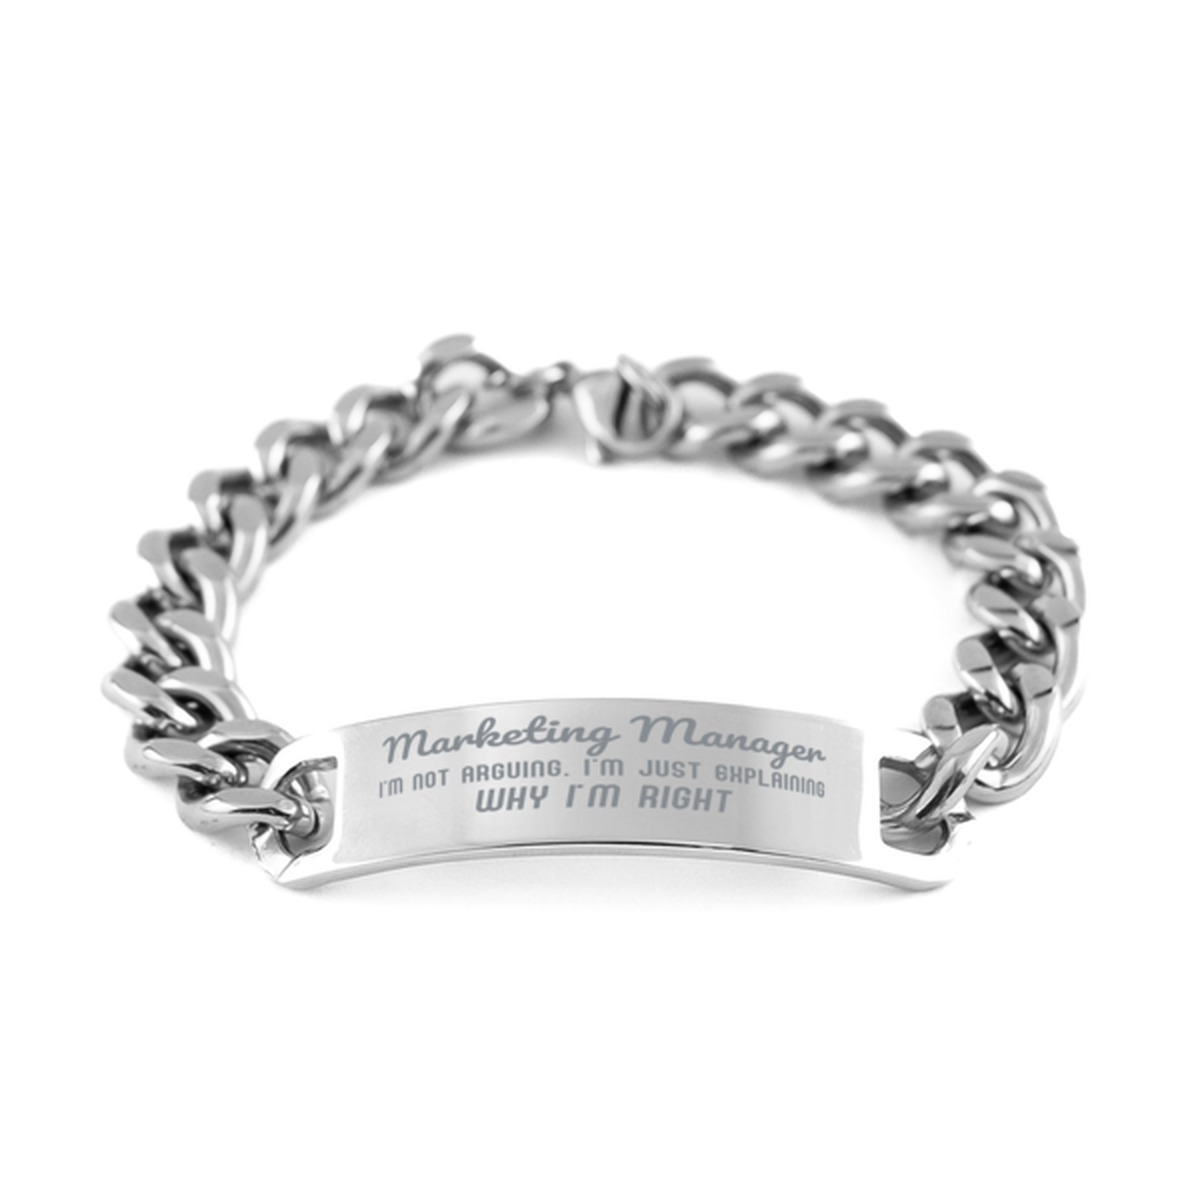 Marketing Manager I'm not Arguing. I'm Just Explaining Why I'm RIGHT Cuban Chain Stainless Steel Bracelet, Graduation Birthday Christmas Marketing Manager Gifts For Marketing Manager Funny Saying Quote Present for Men Women Coworker